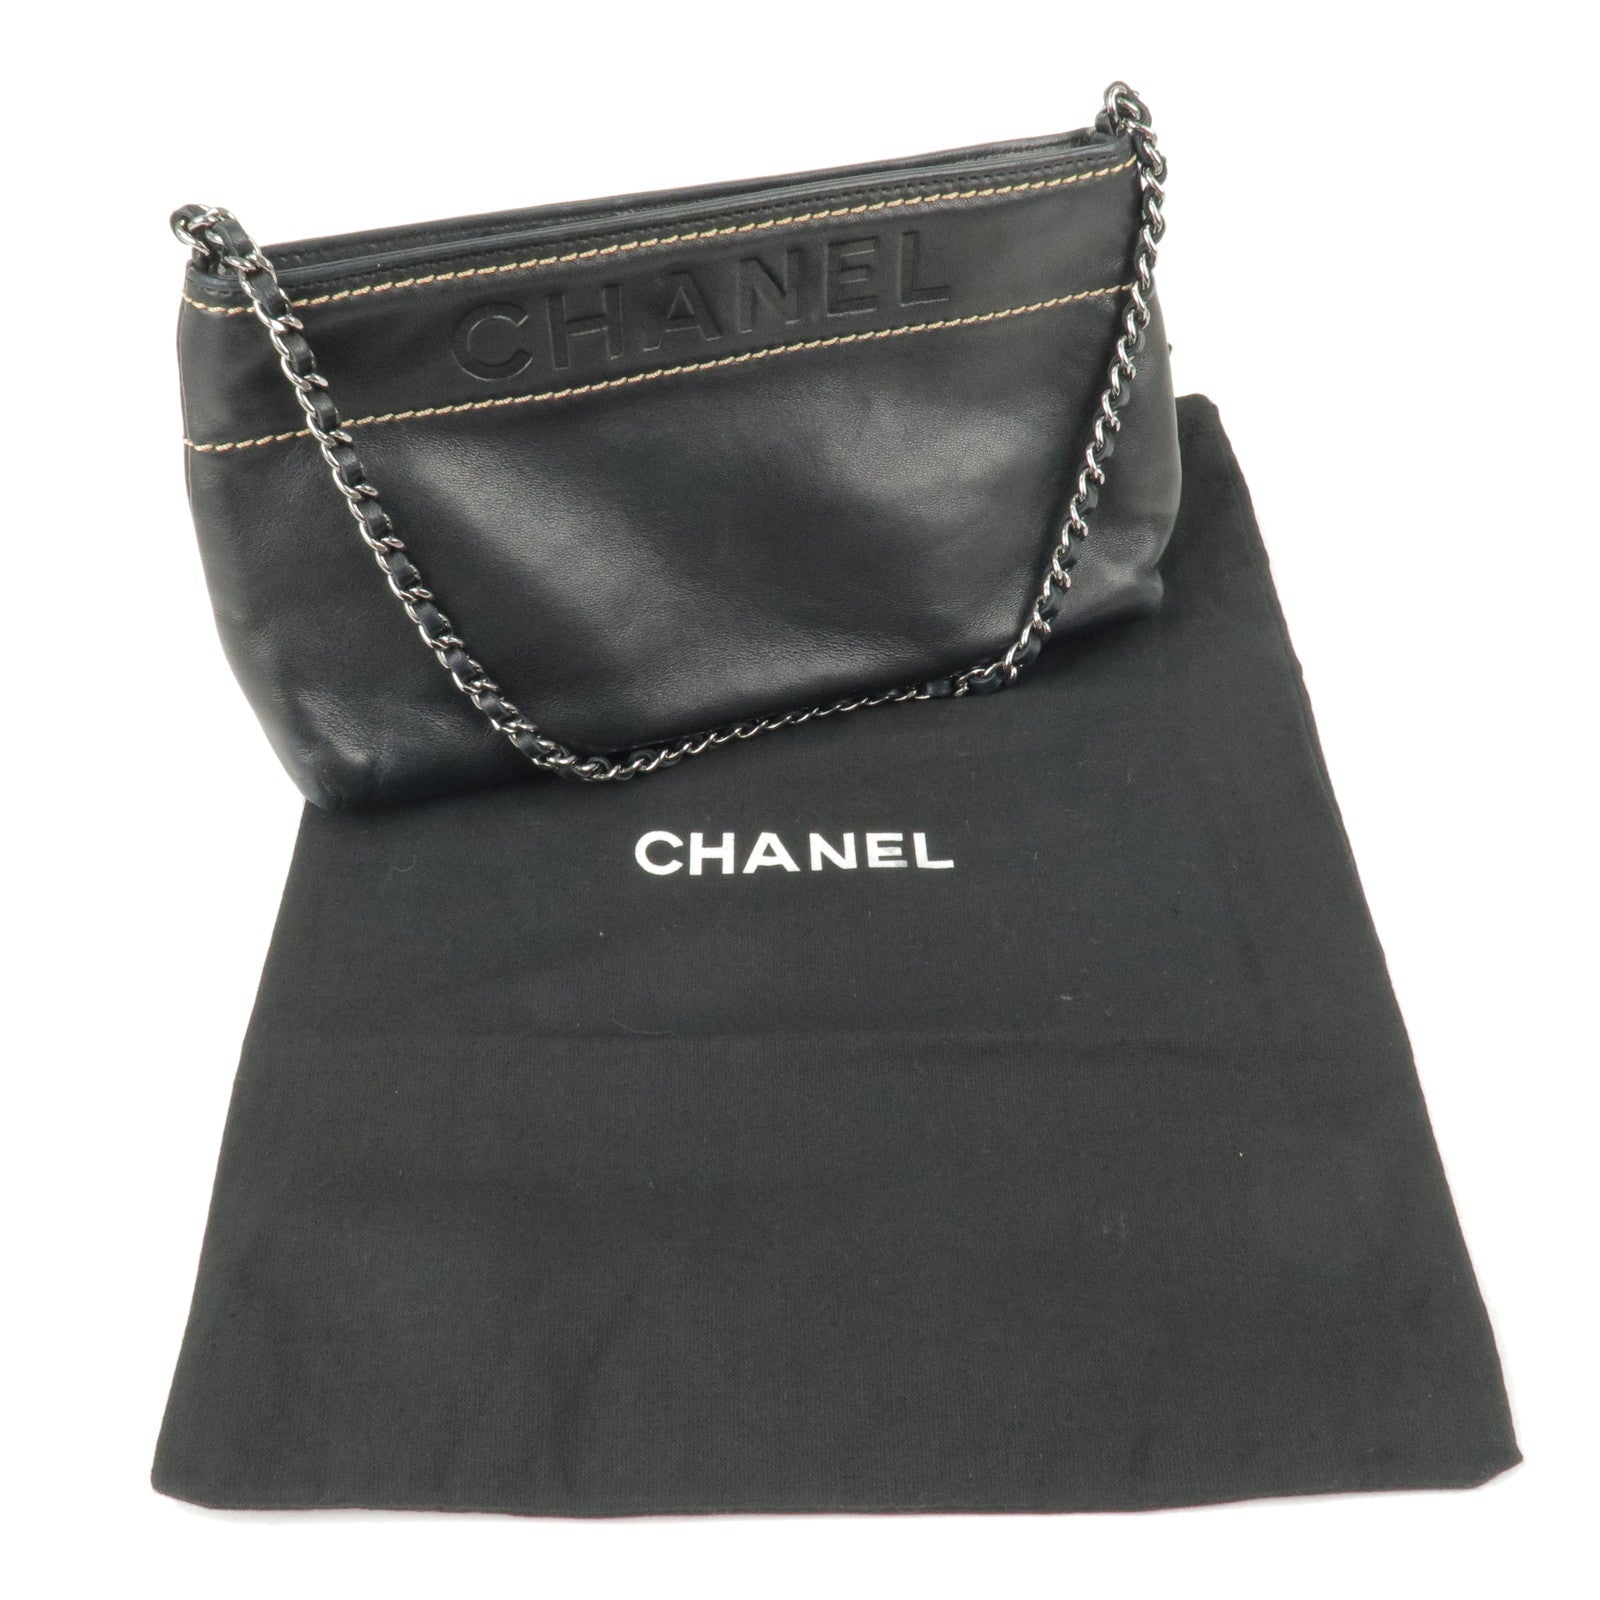 Hardware – chanel pre owned sequin embellished skirt suit item - Black -  Silver - Accessory - Chanel Pre-Owned джинсовое платье без рукавов - Chain  - Pouch - Leather - CHANEL